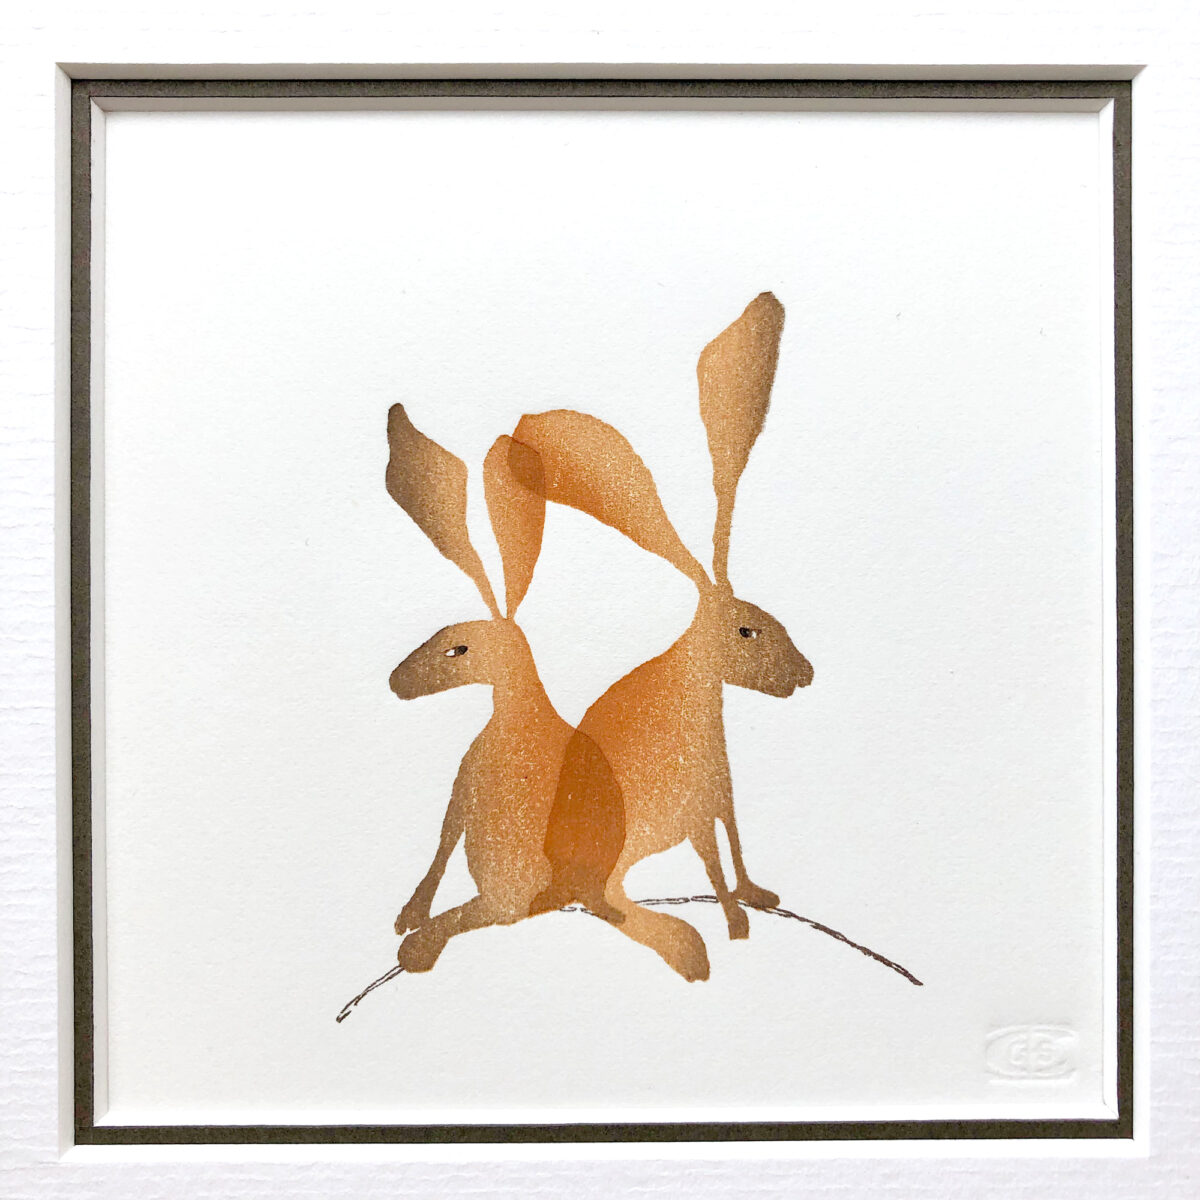 Hare and Hare Alike woodblock print by Claire Cameron-Smith